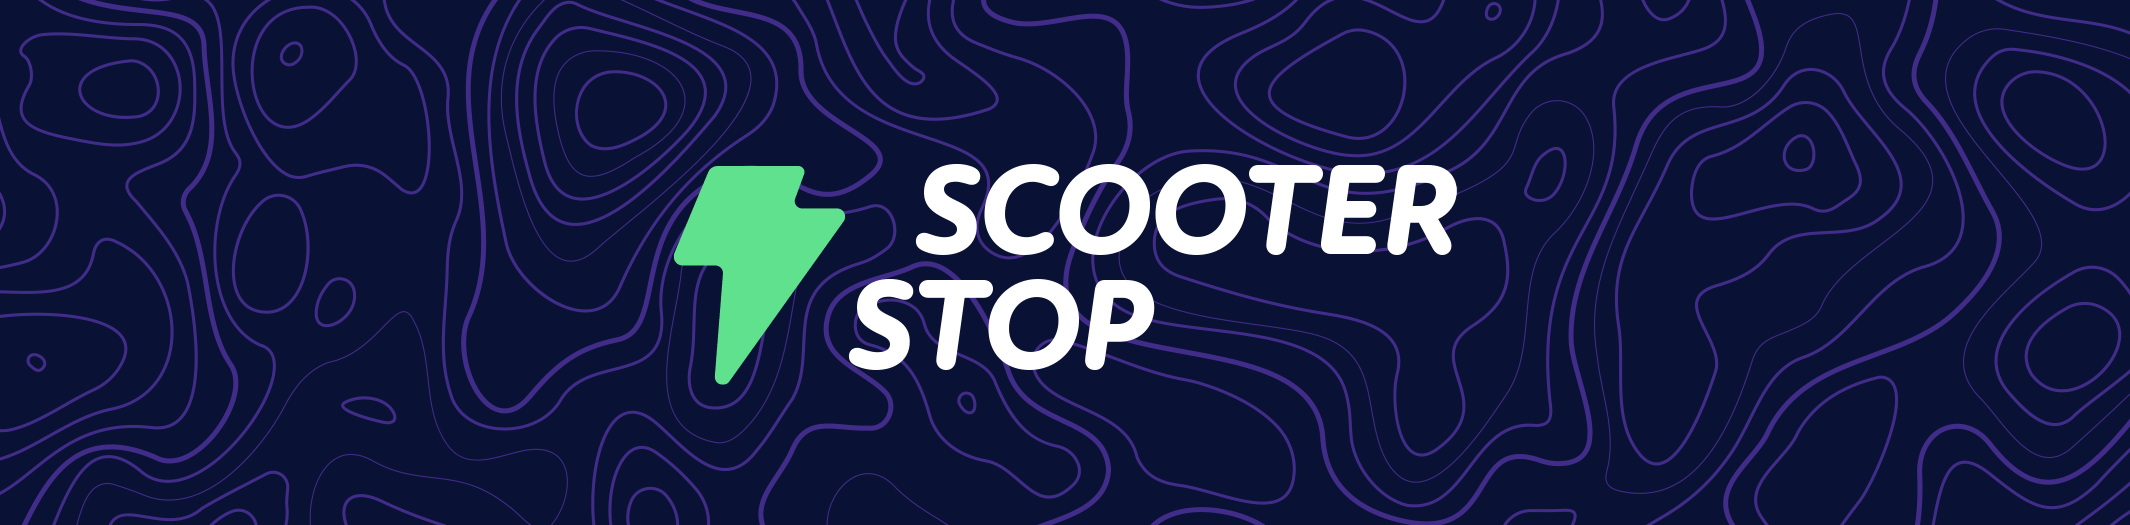 E-Scooter startup brand identity and website